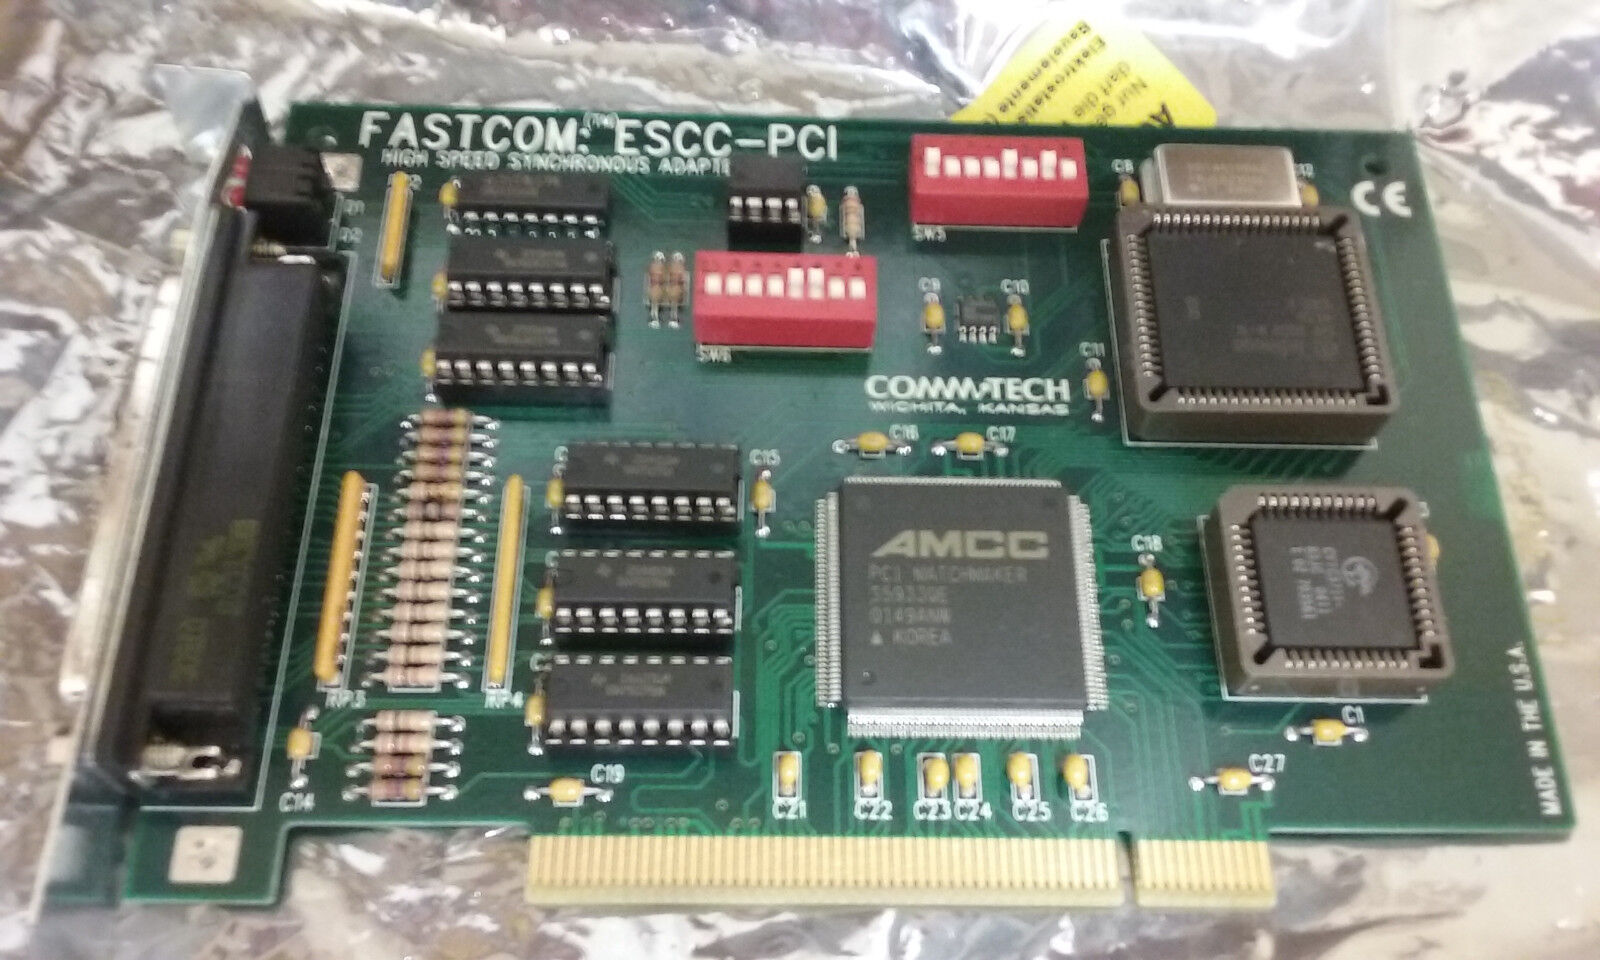 COMM TECH FASTCOM ESCC-PCI High speed Synchronous Adapter RS485 Communication 